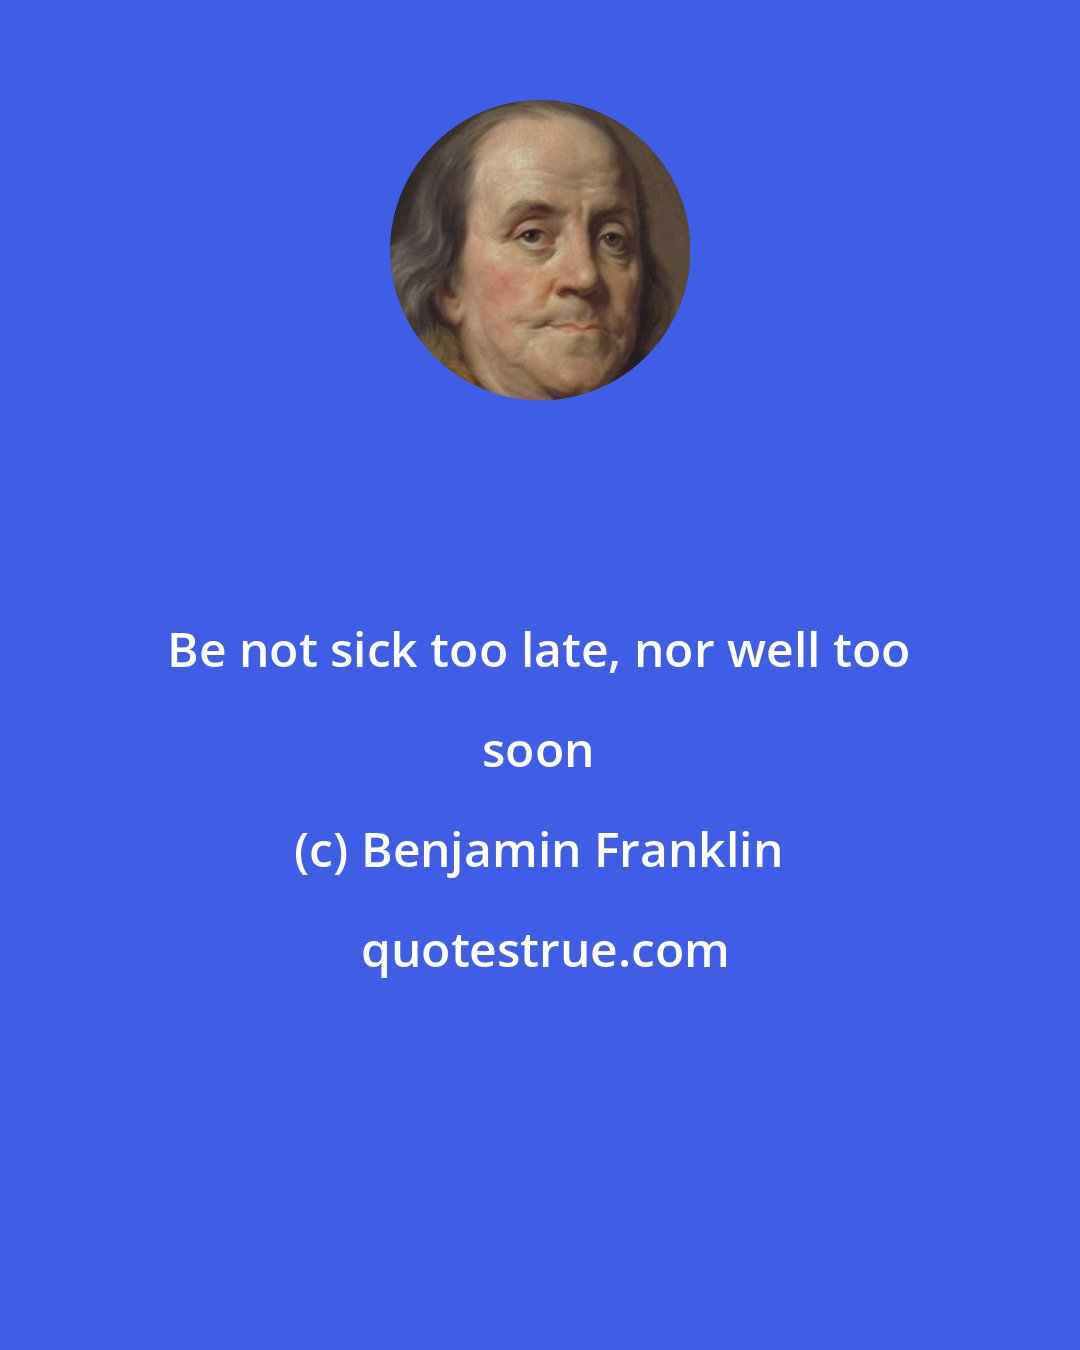 Benjamin Franklin: Be not sick too late, nor well too soon